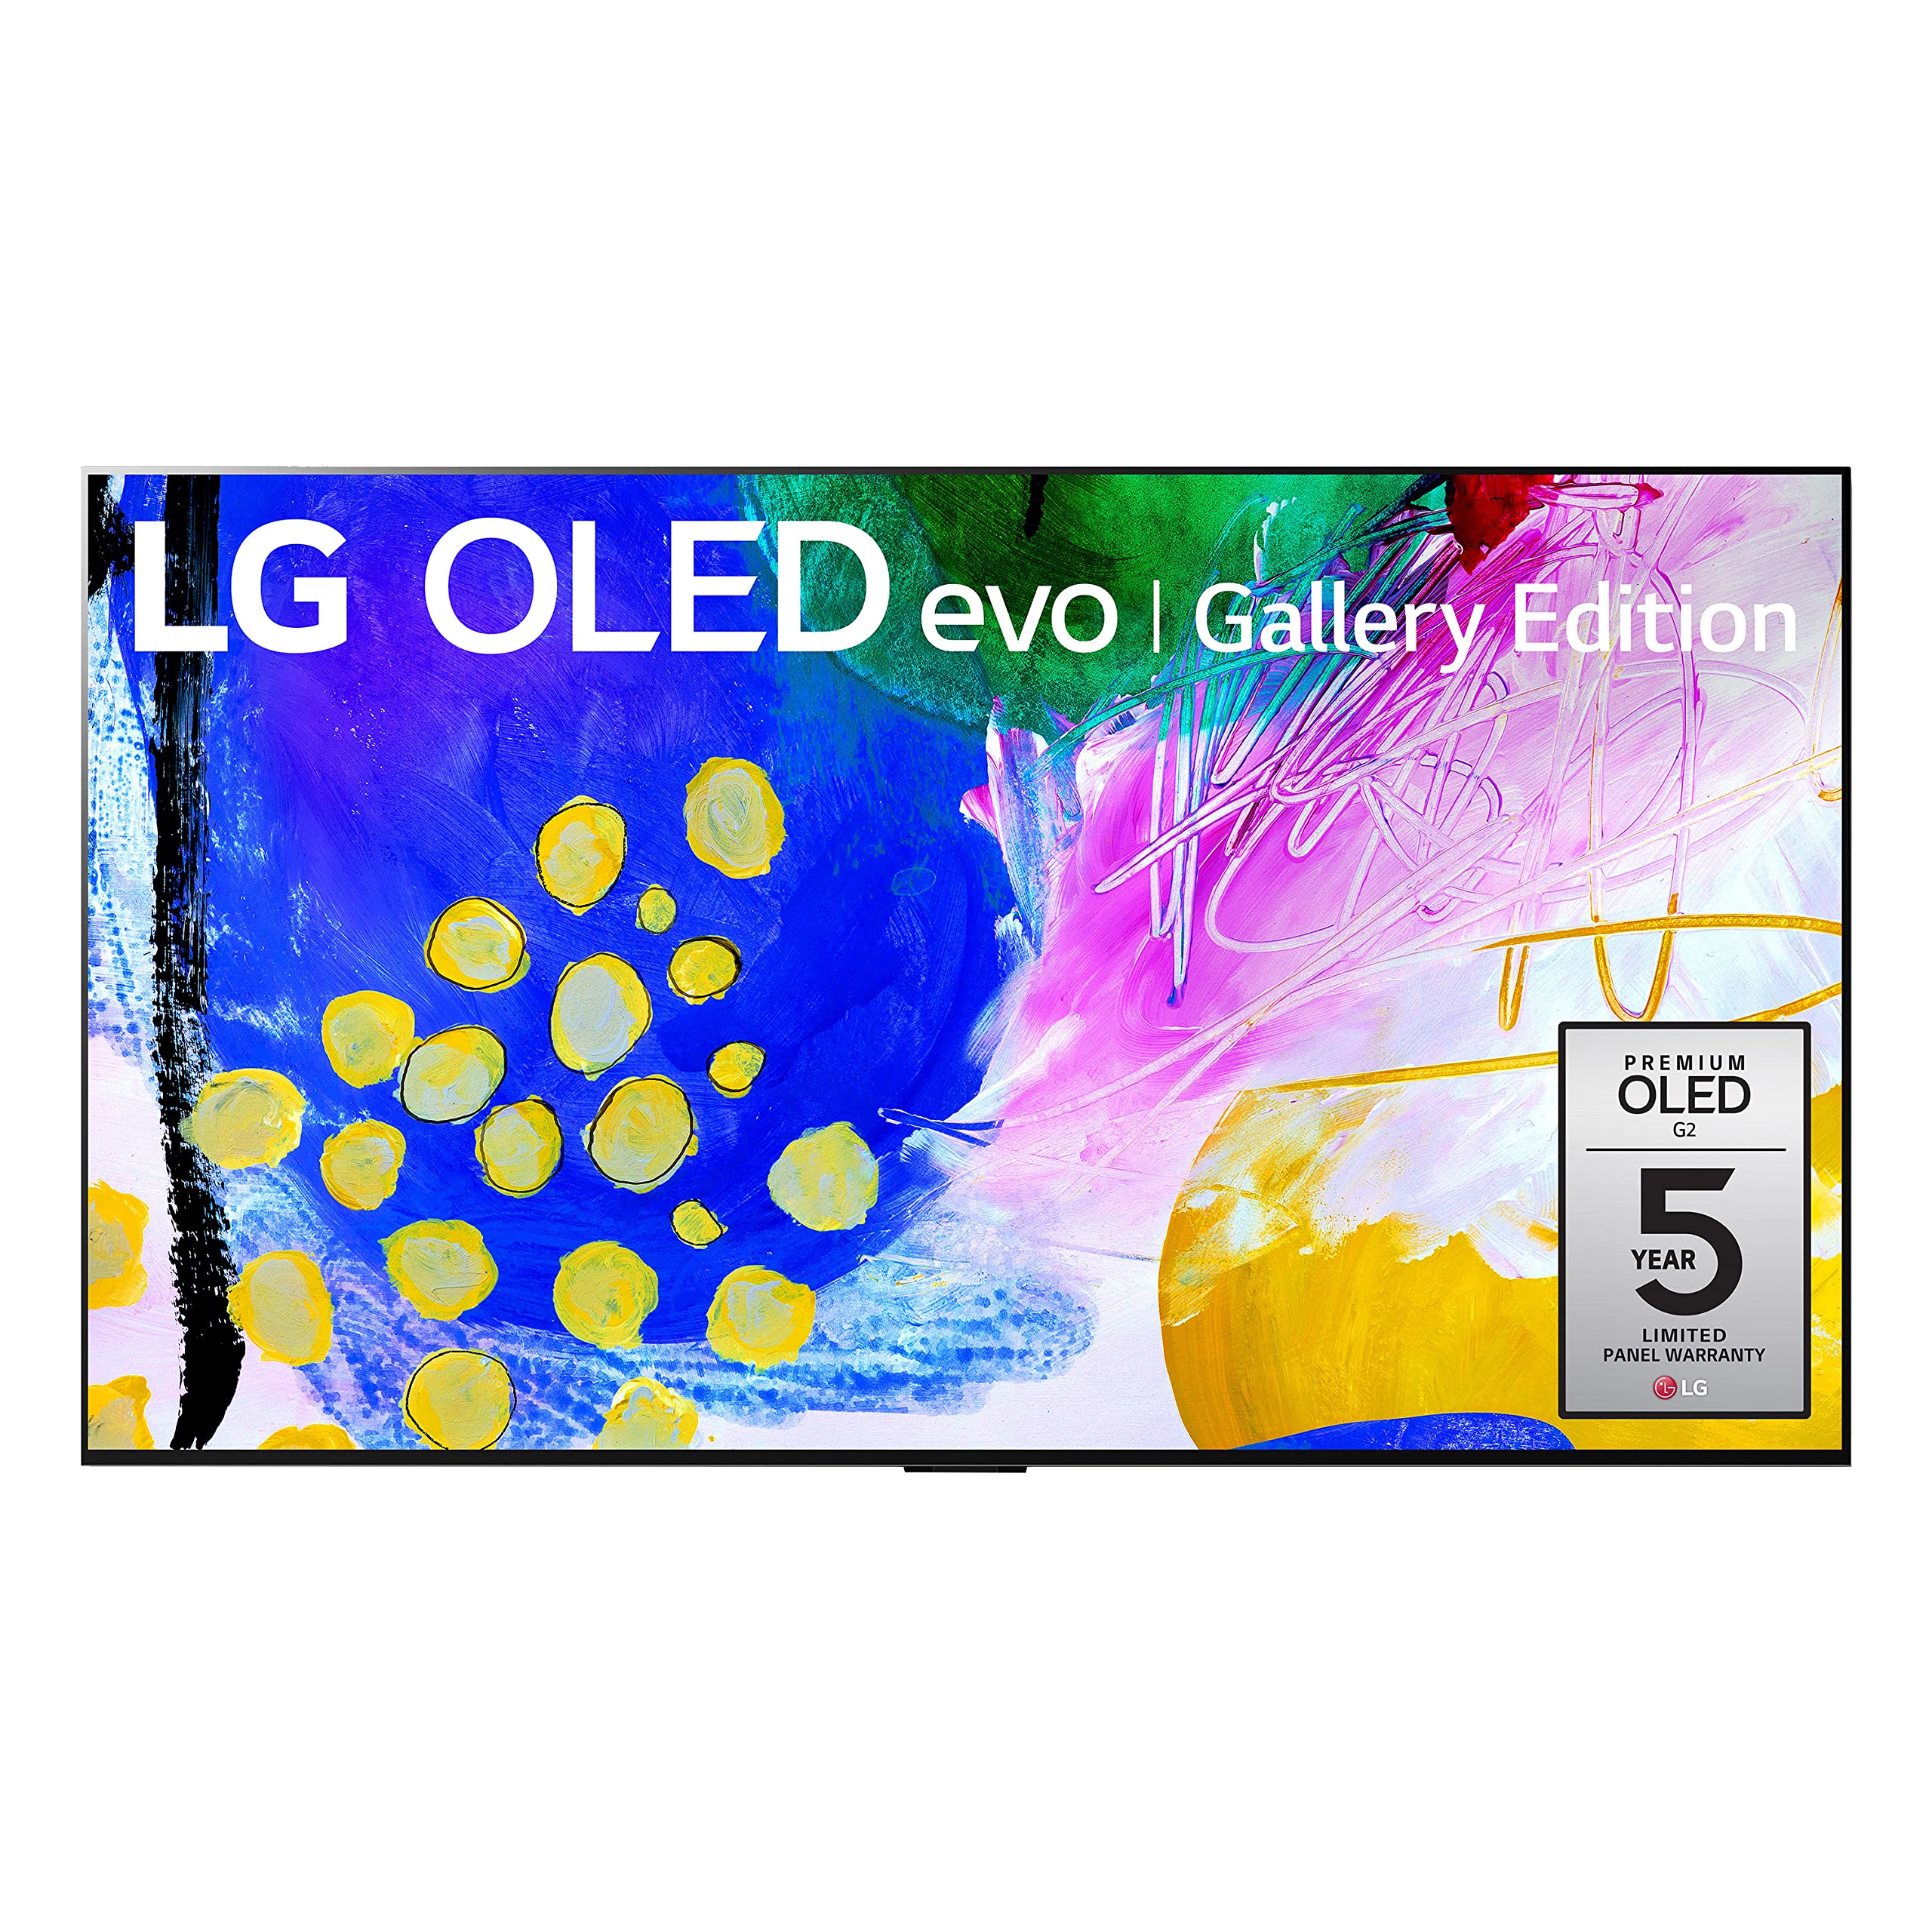 Prime Members: $2836.99: LG G2 Series 77-Inch Class OLED evo Gallery Edition Smart TV